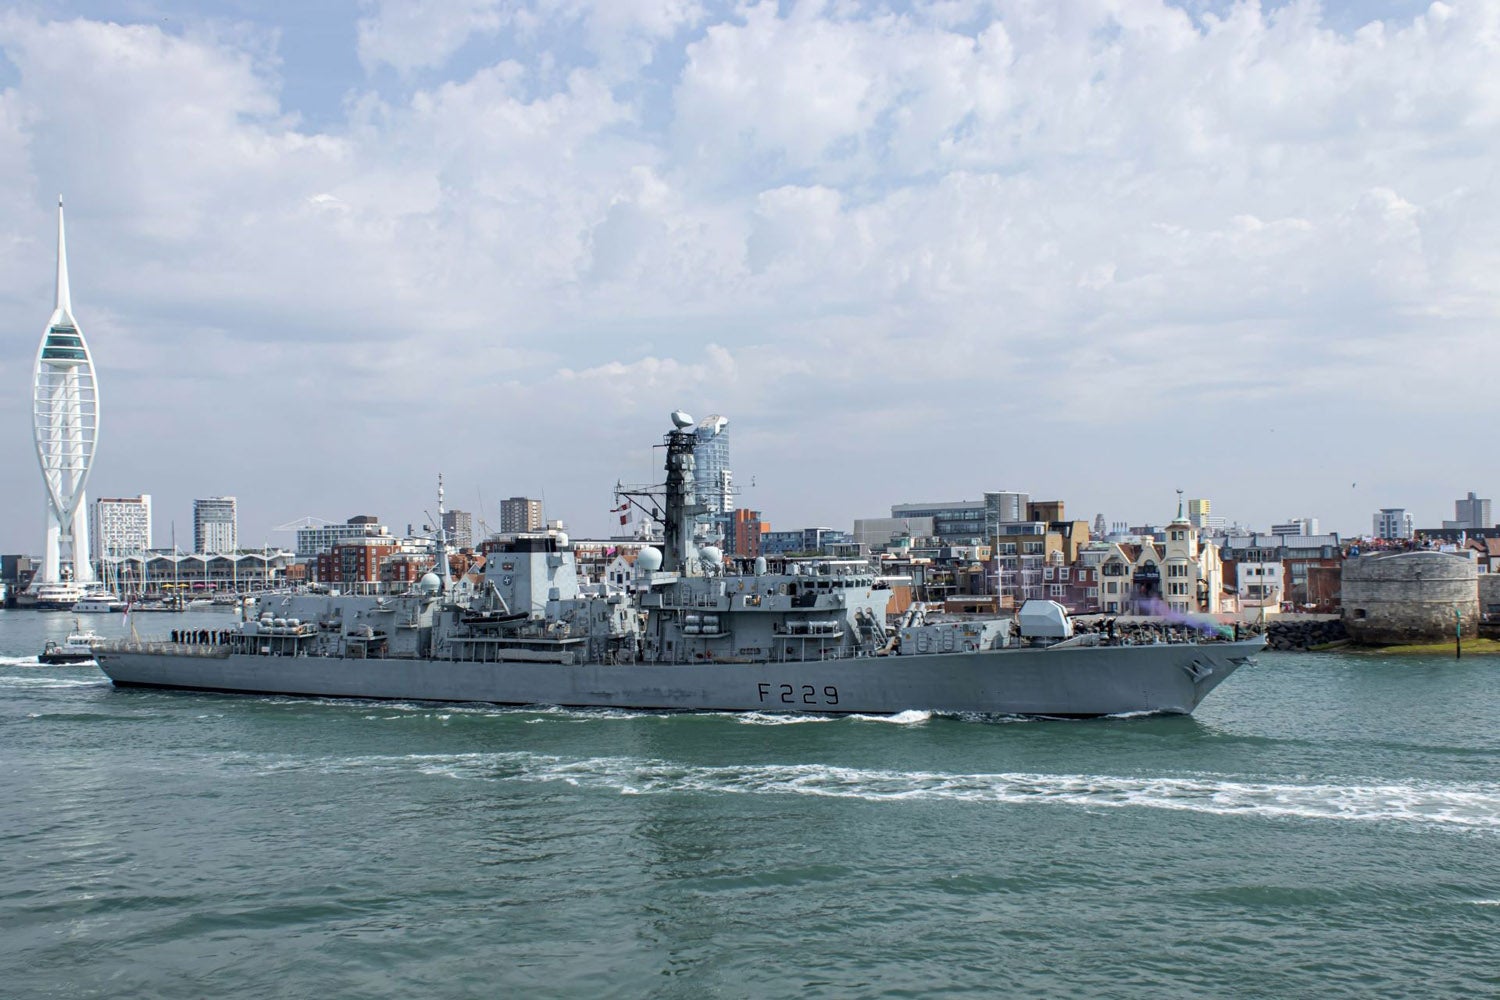 HMS Lancaster departs for three-year security mission in Gulf